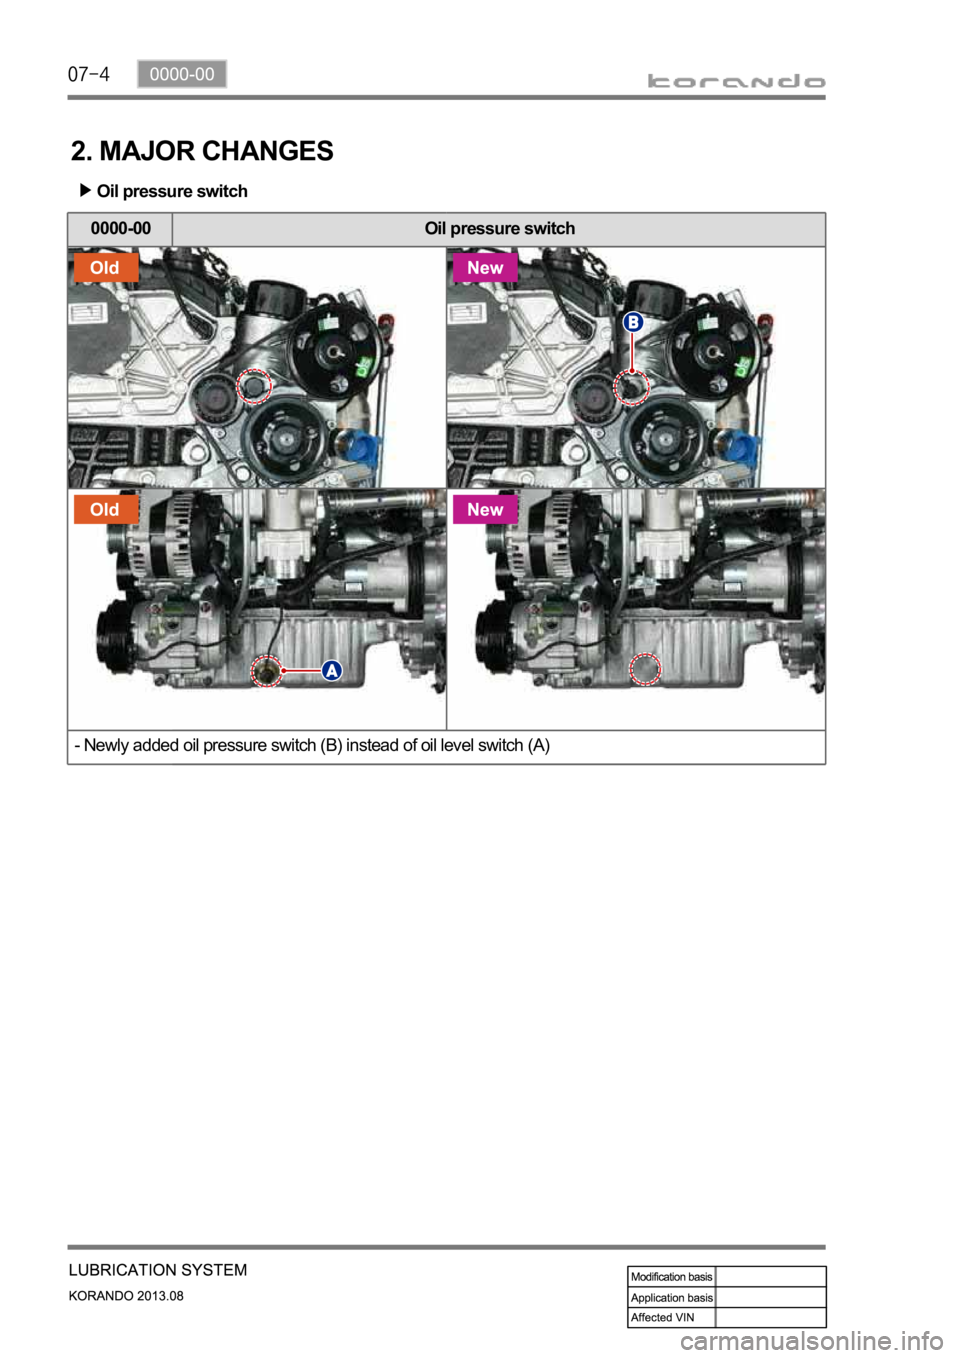 SSANGYONG KORANDO 2013  Service Manual 2. MAJOR CHANGES
Oil pressure switch
0000-00 Oil pressure switch
- Newly added oil pressure switch (B) instead of oil level switch (A) 